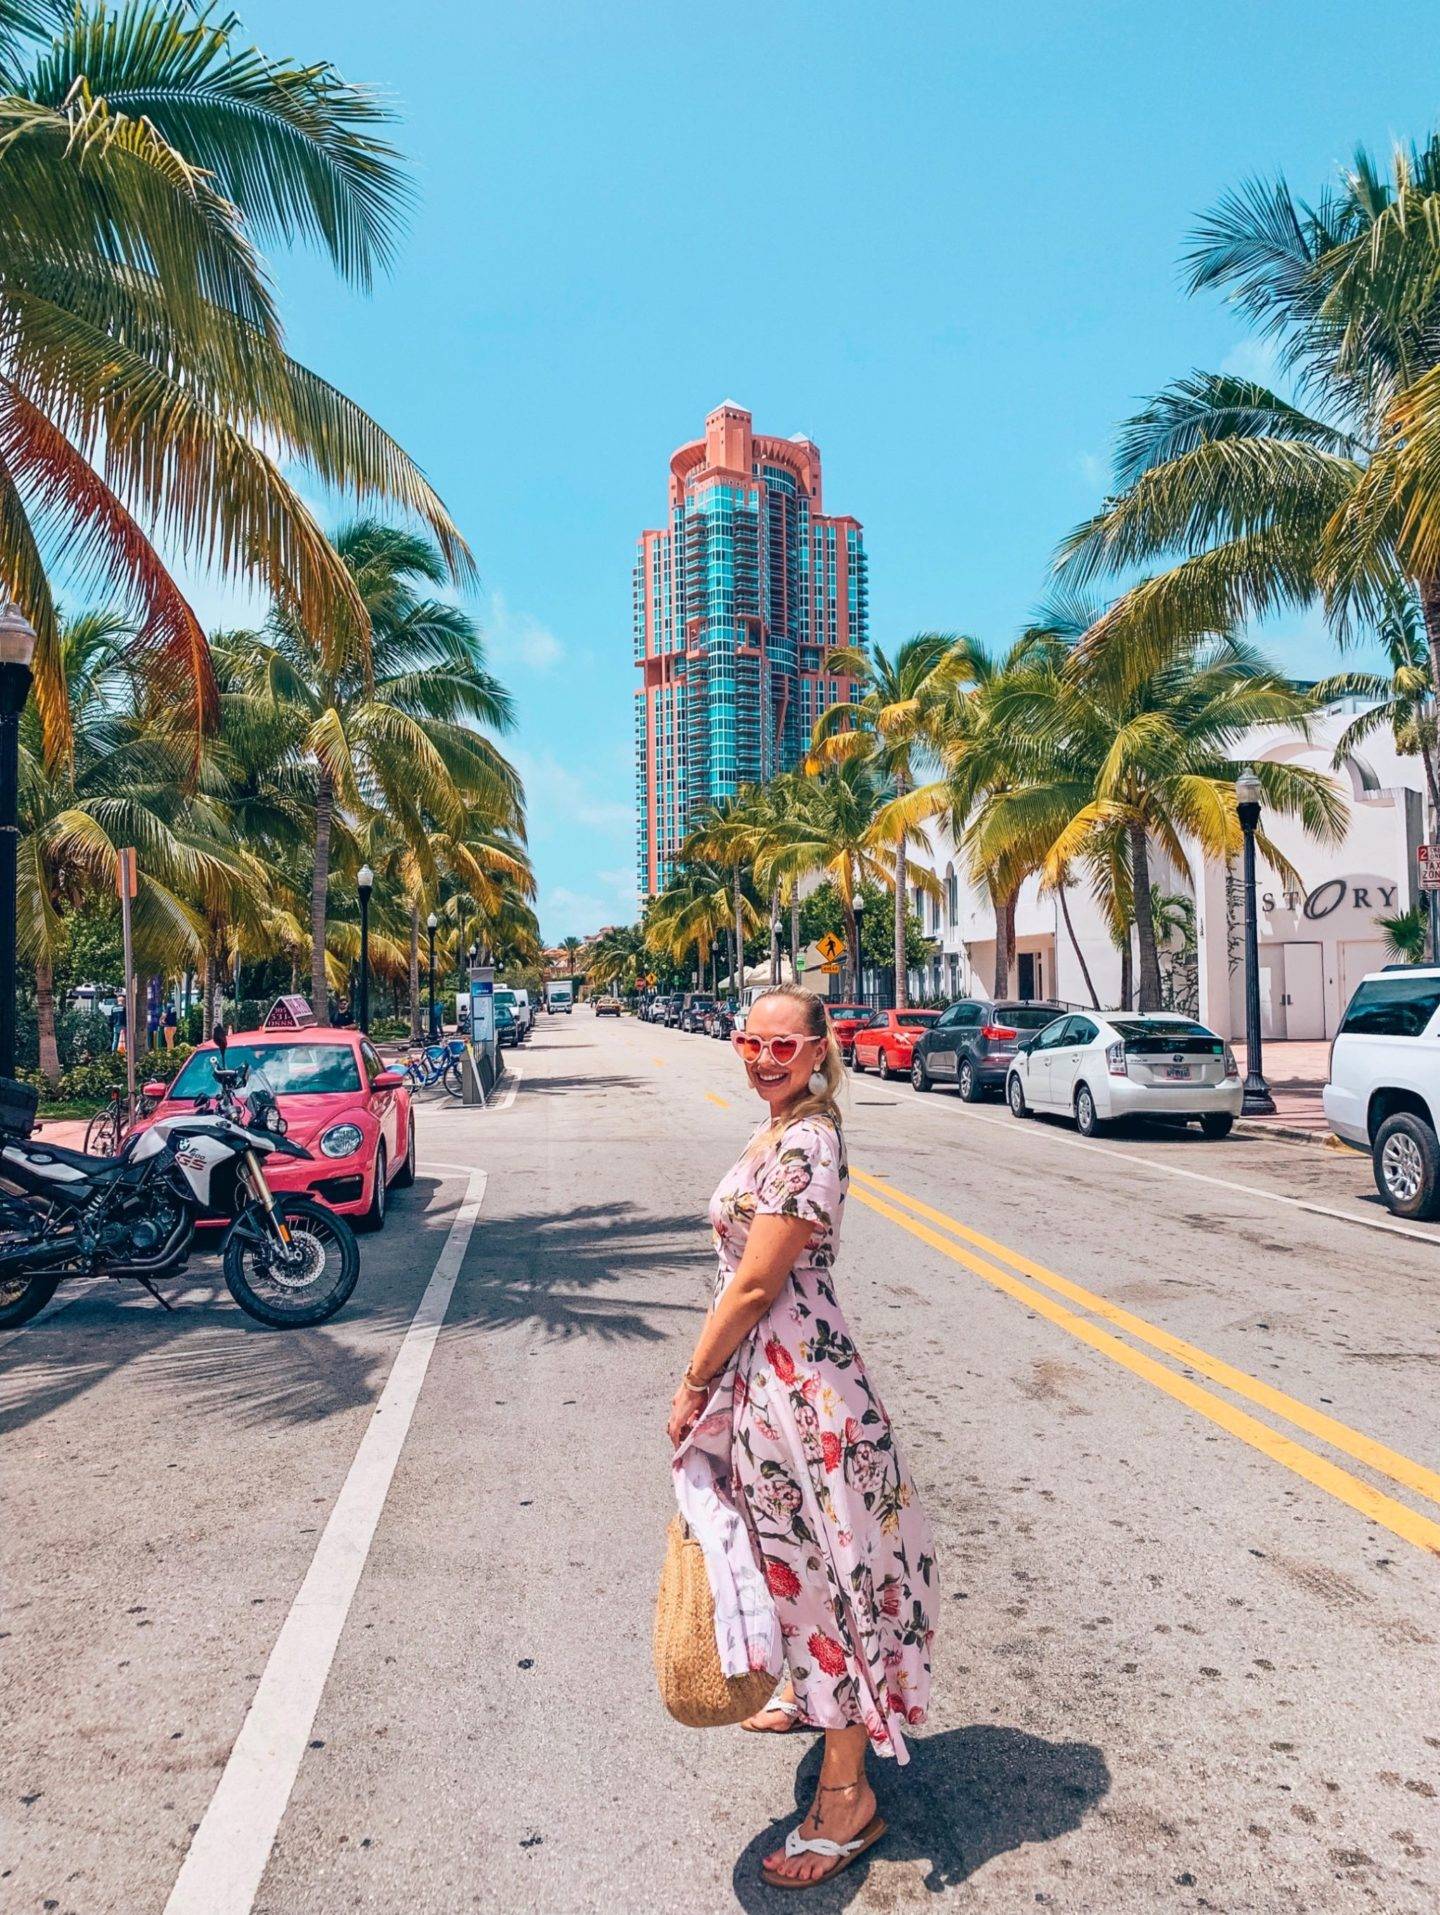 SOFI (the south of fifth neighbourhood) is the perfect place to stay in South Beach for those looking for a quieter and more relaxing vacation.